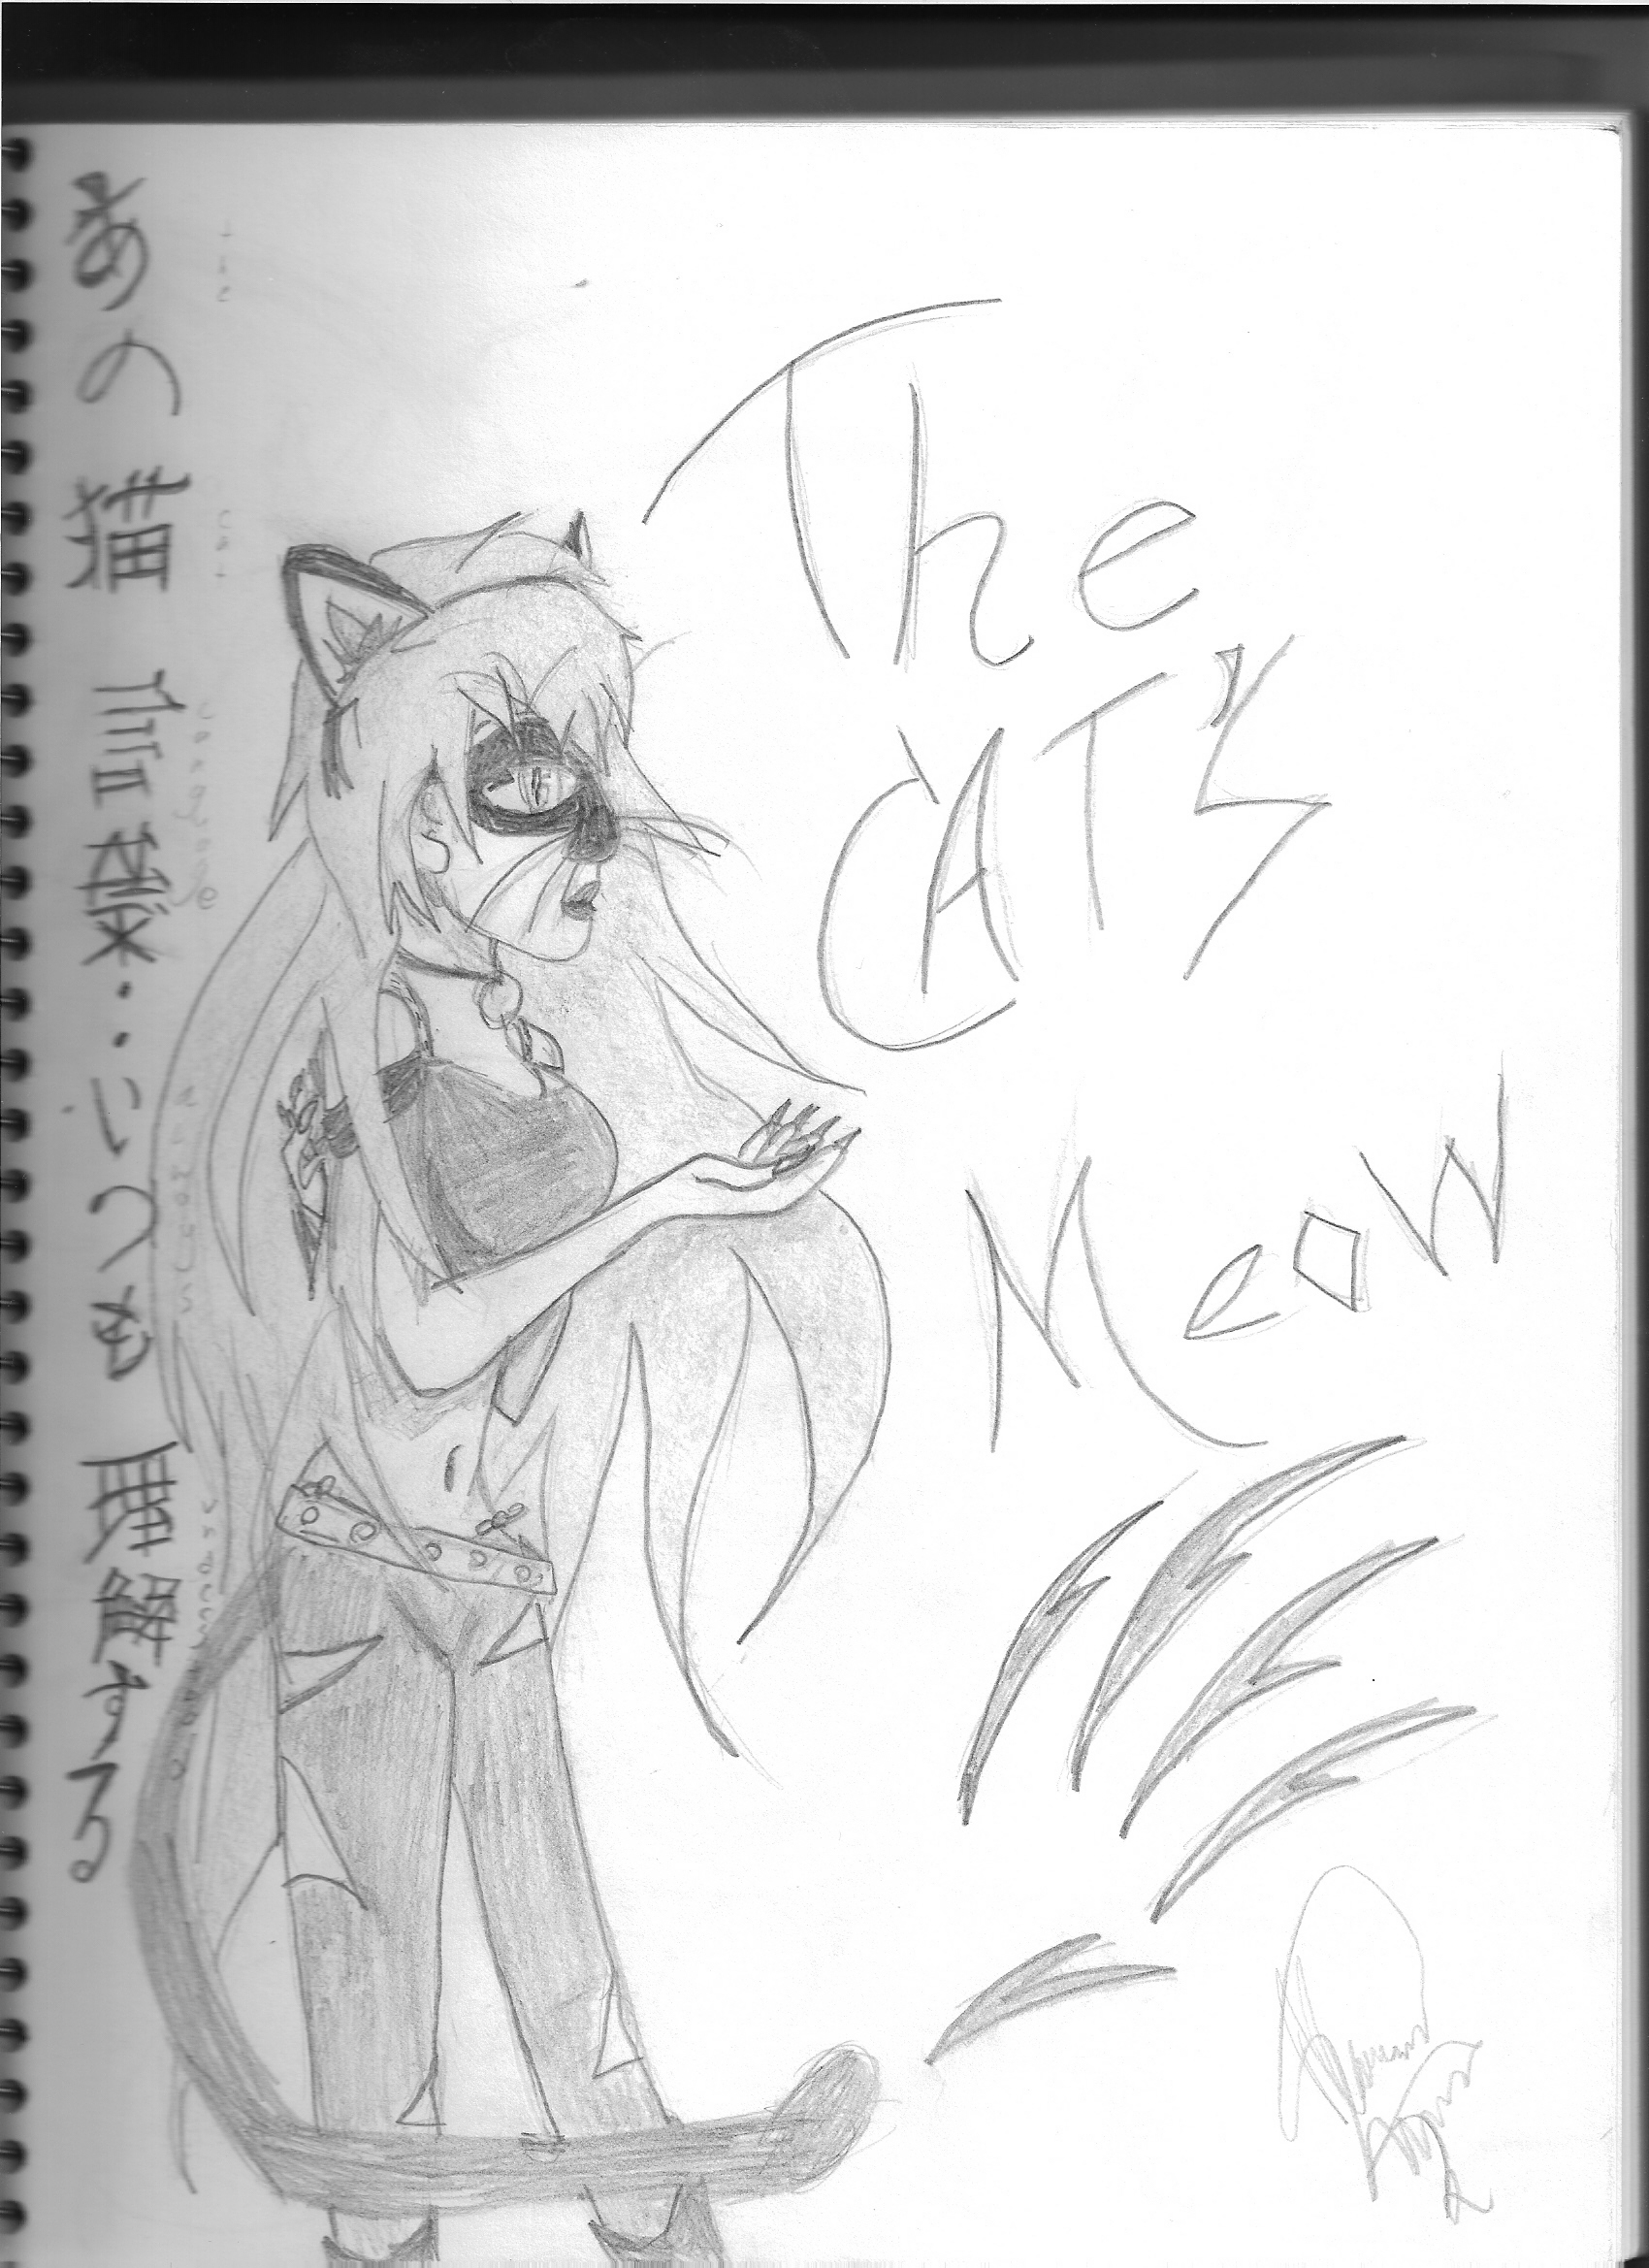 The Cats Meow by KyosGirl